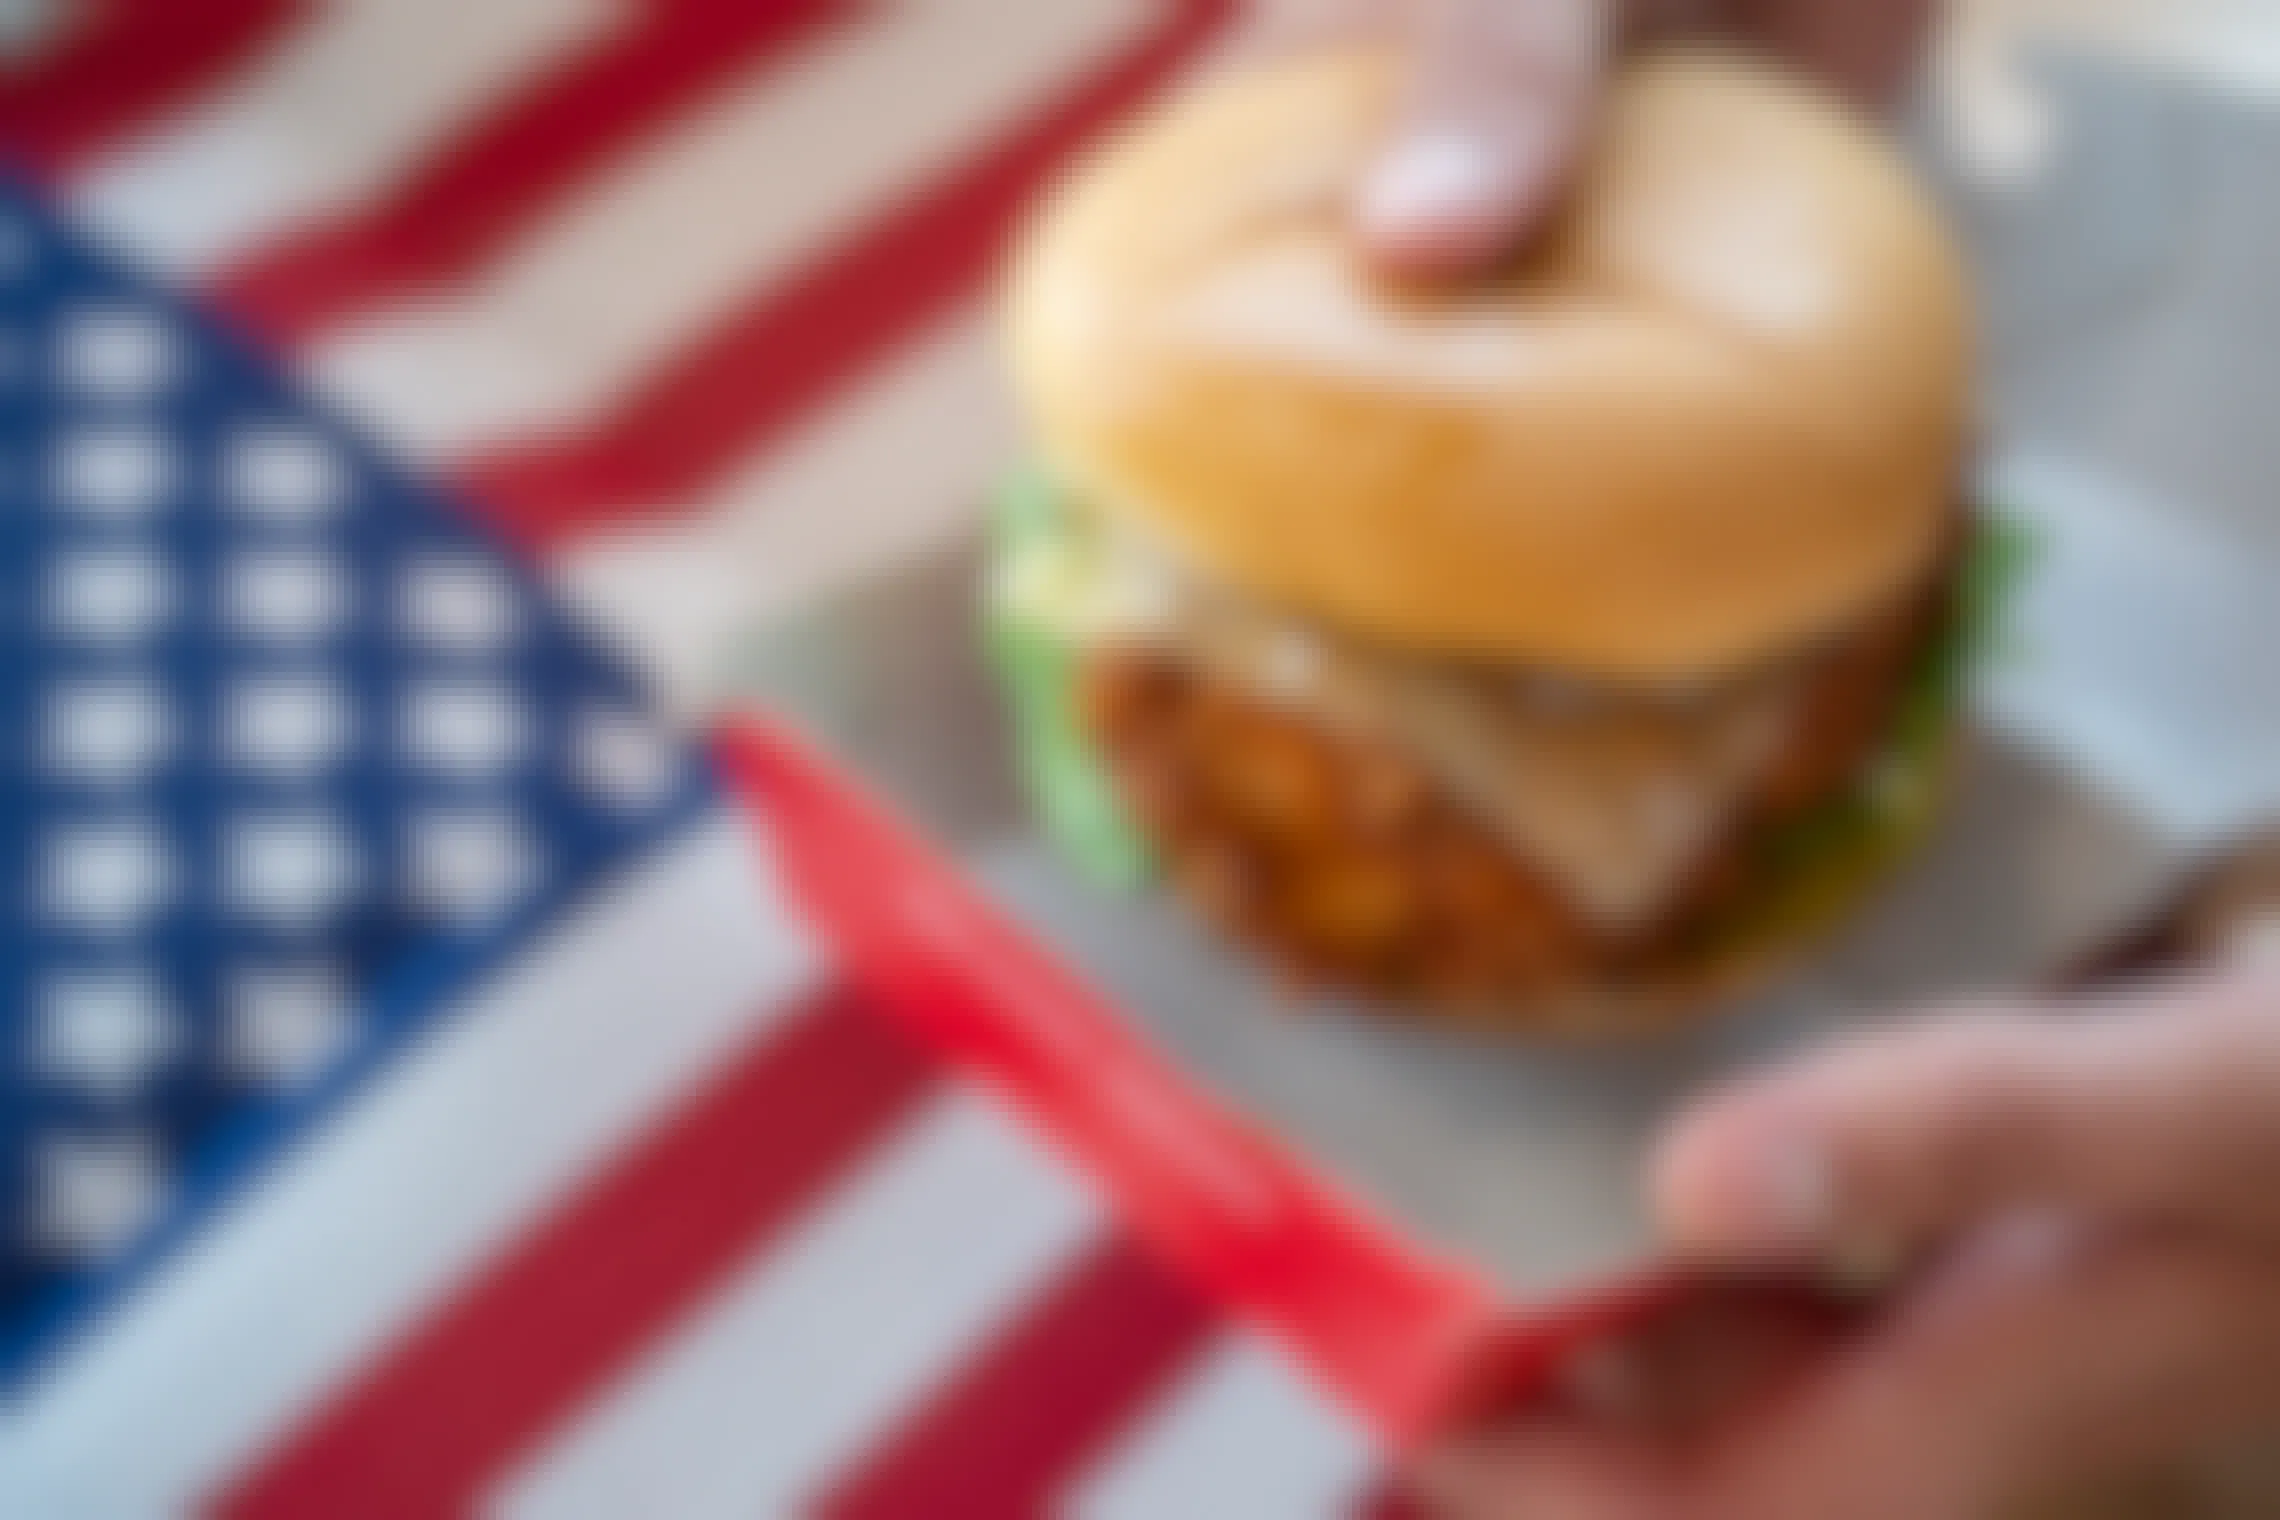 A Chick-fil-A chicken sandwich being held above an American flag.